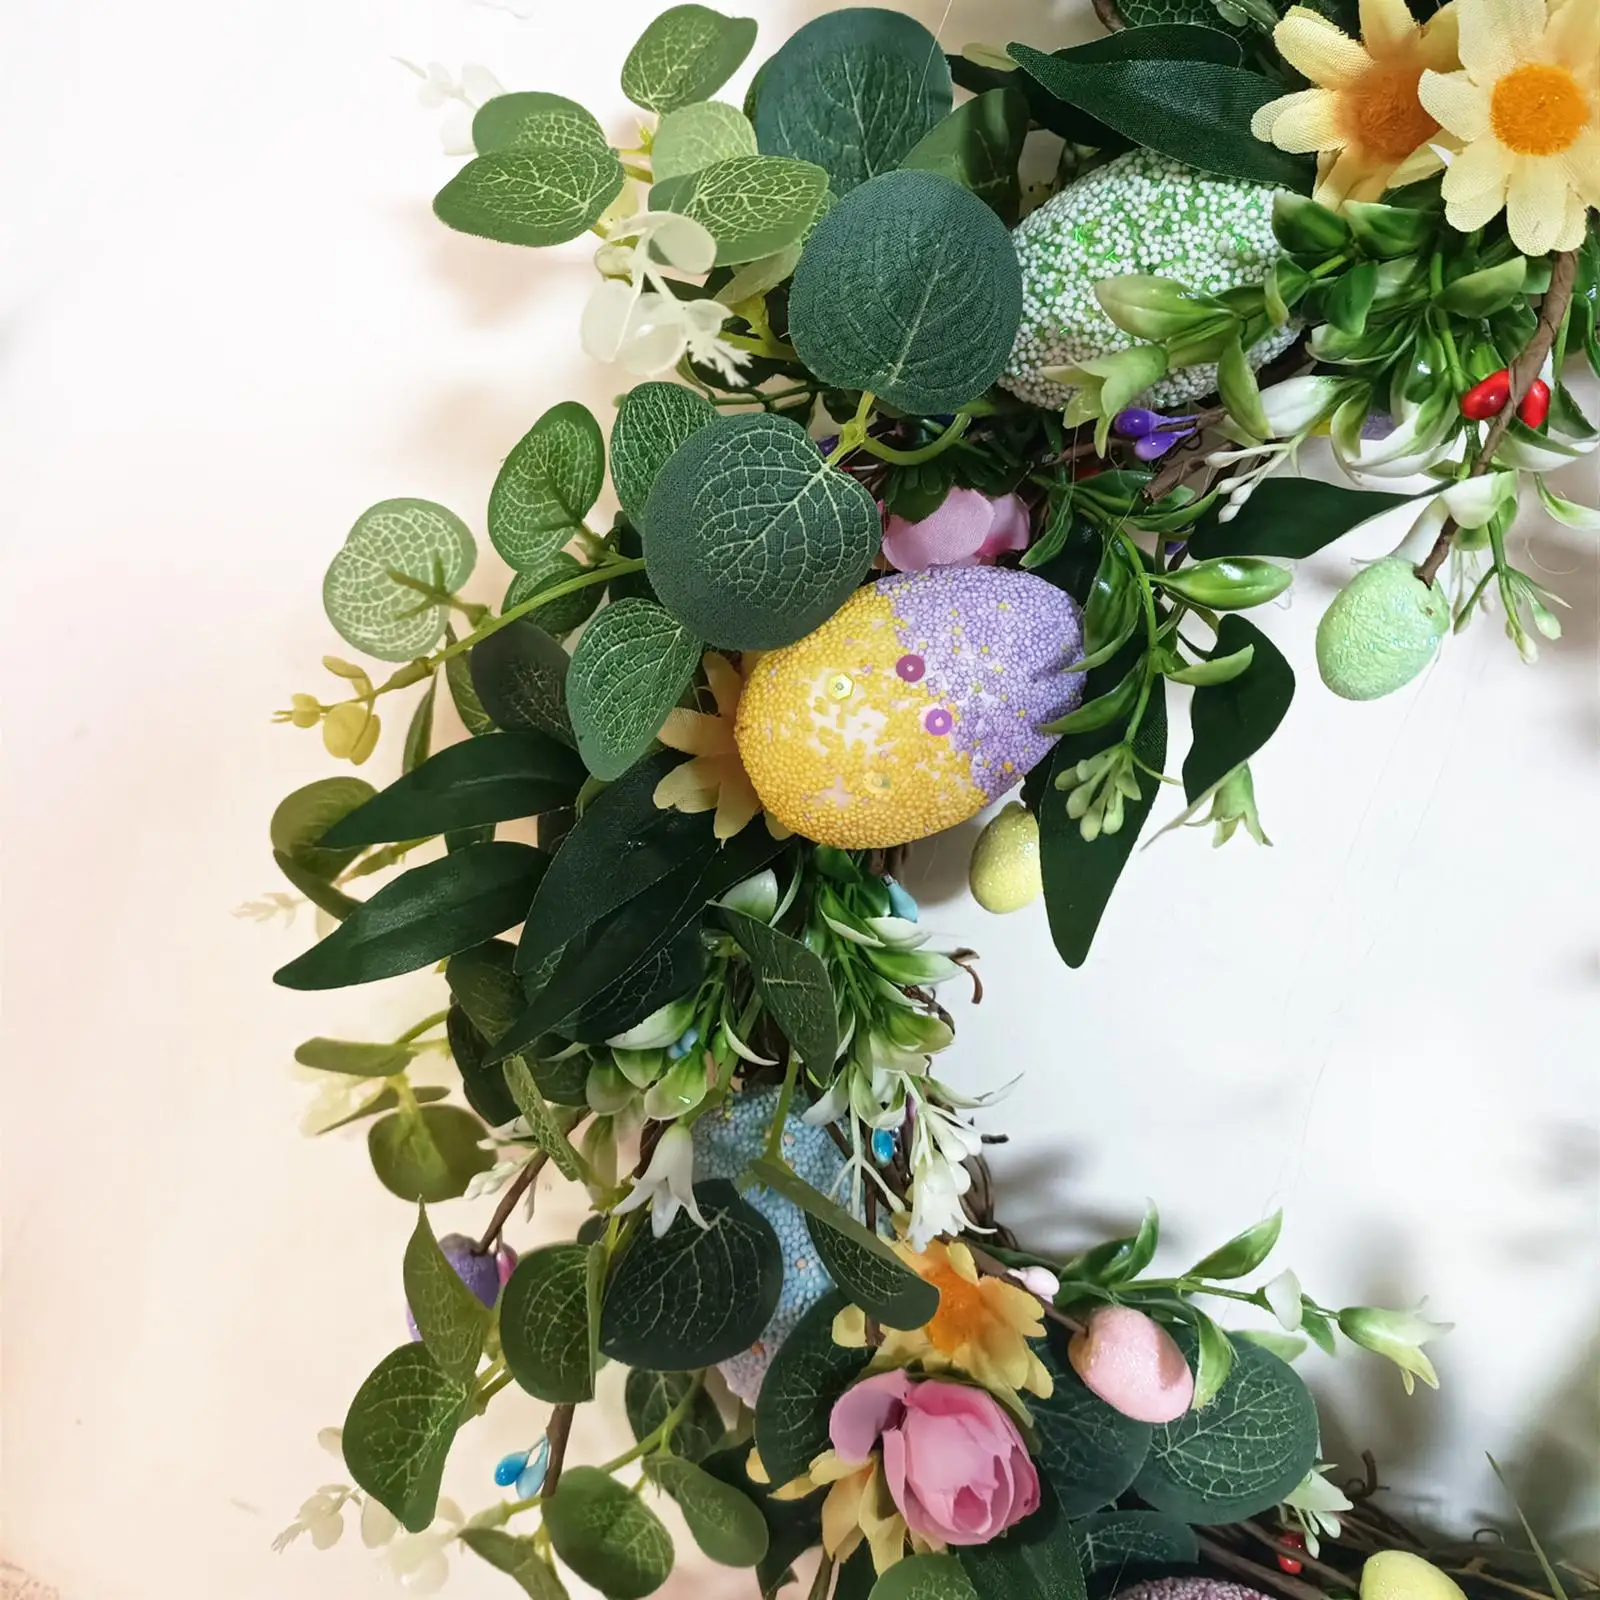 Easter Egg Wreath Artificial Flower Wreath Greenery Leaves Spring Summer Wreath for Holiday Celebration Farmhouse Porch Decor